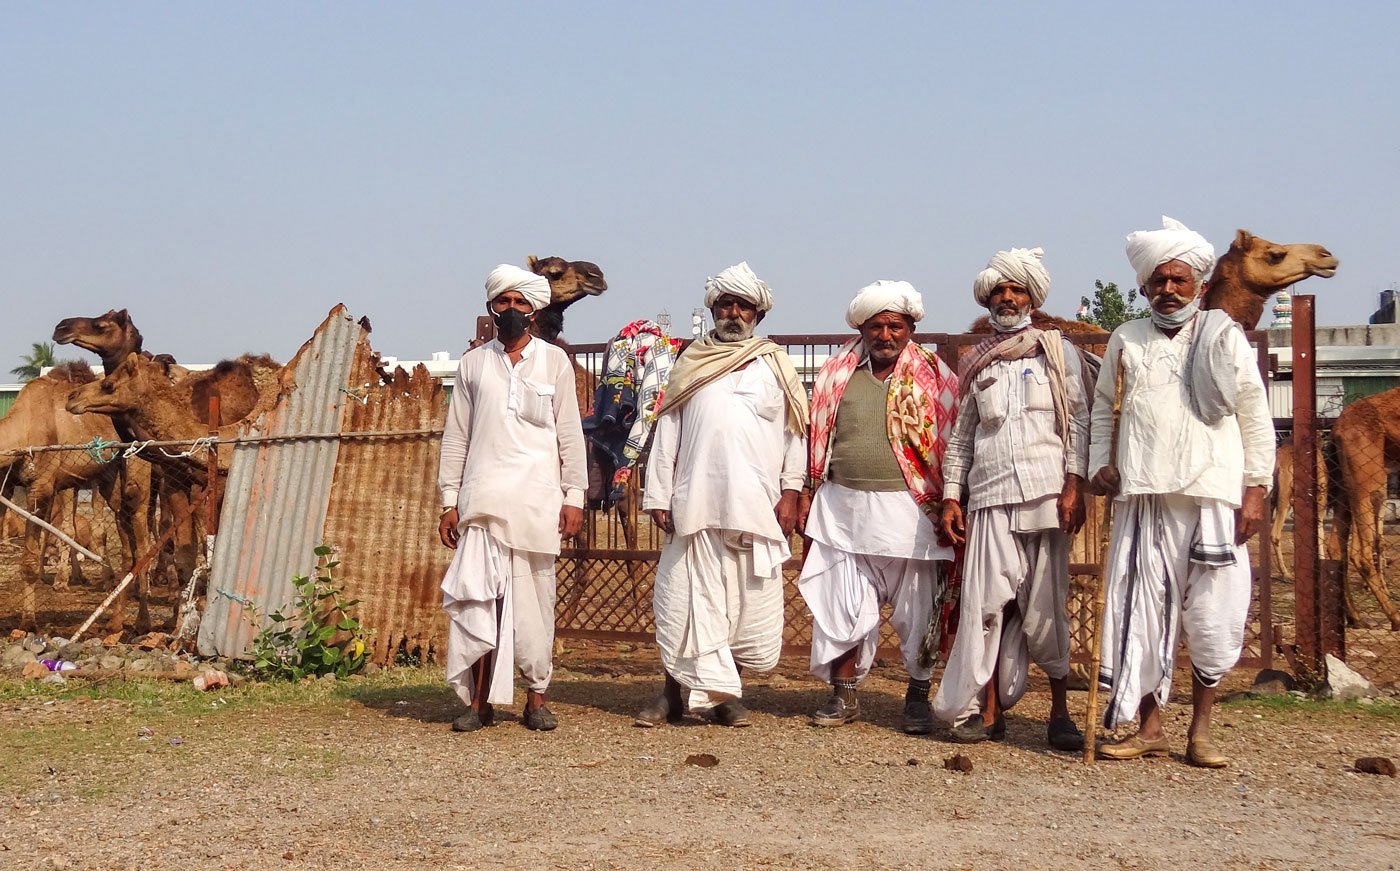 Rabari pastoralists camping in Amravati to help secure the release of the detained camels and their herders